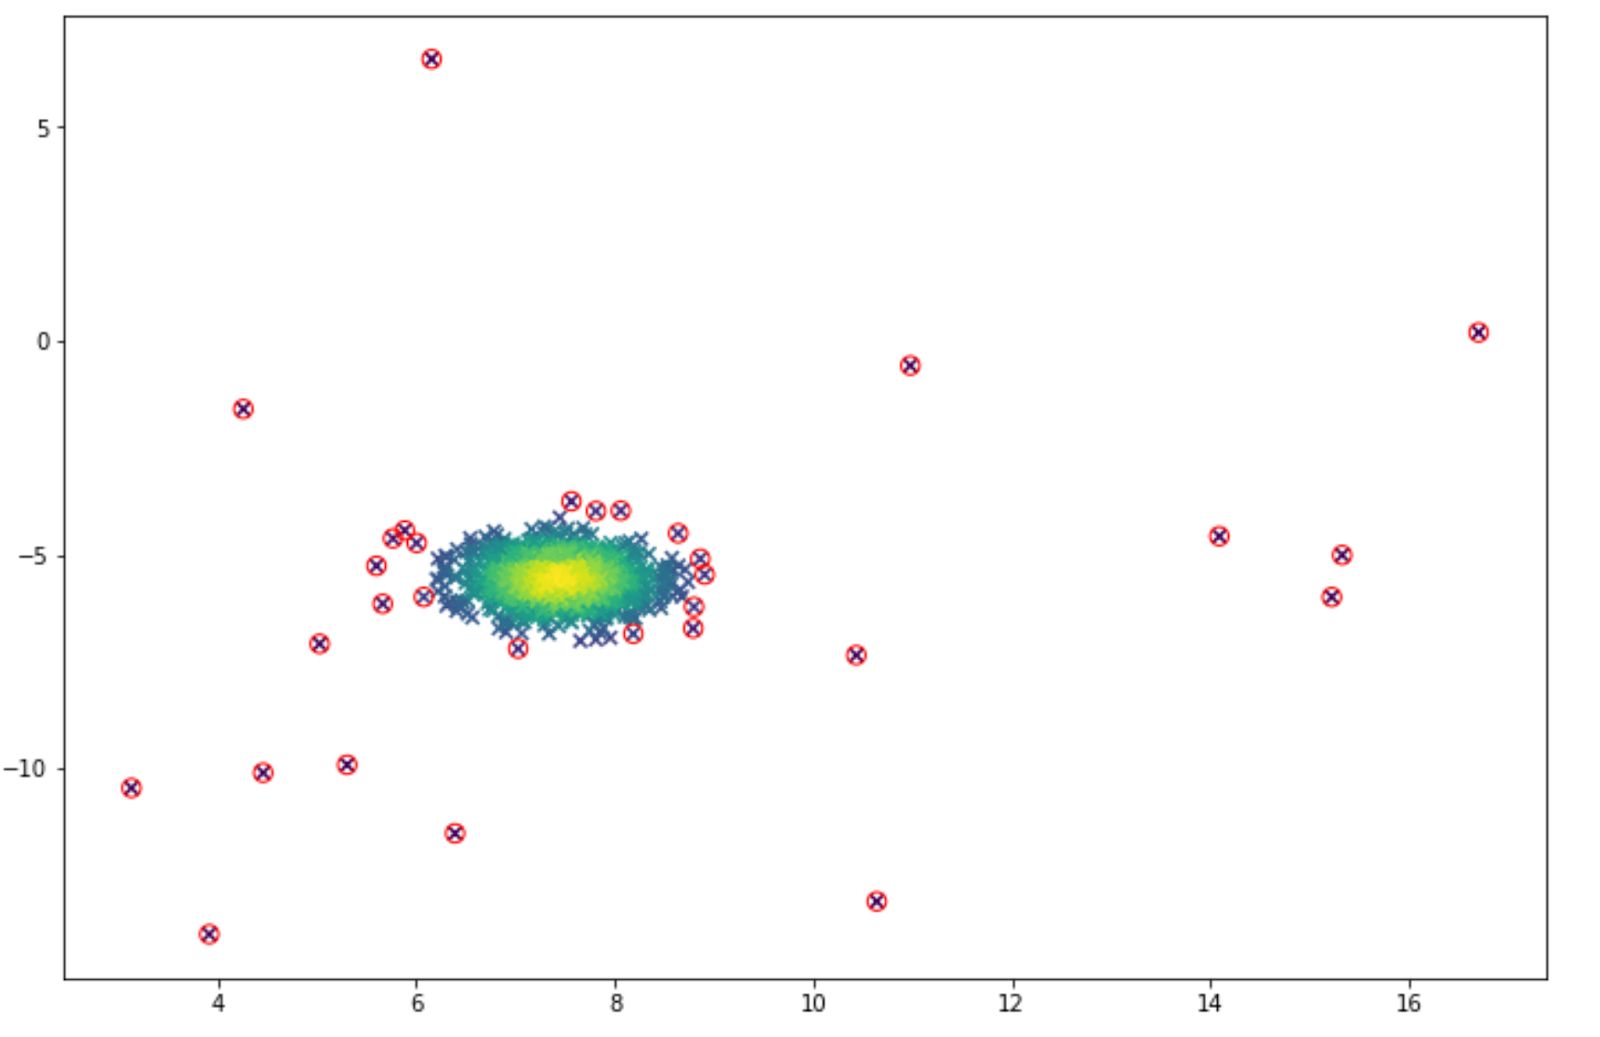 Visualization of the anomaly detection in unsupervised learning algorithm